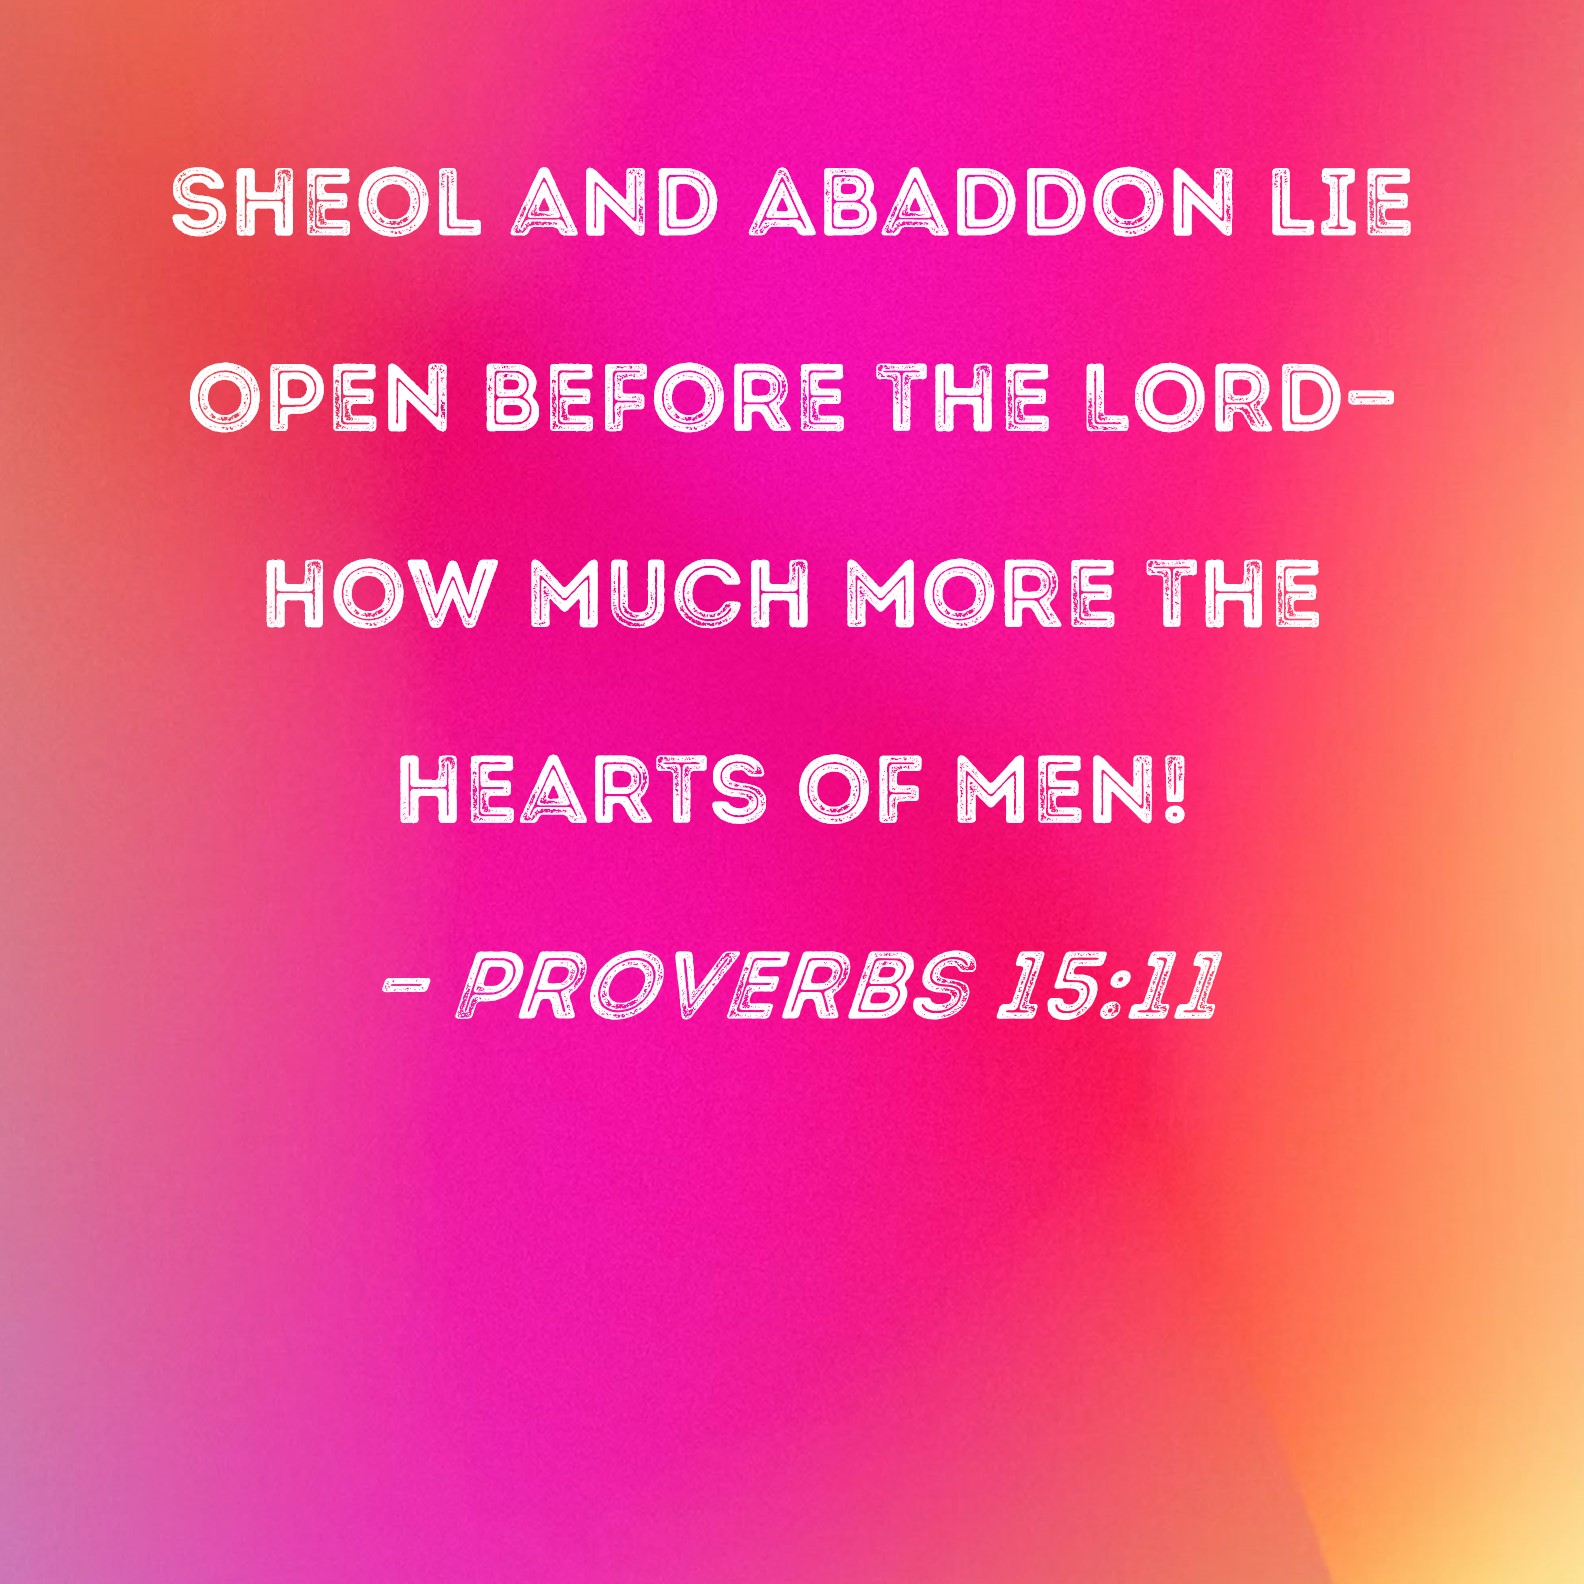 proverbs-15-11-sheol-and-abaddon-lie-open-before-the-lord-how-much